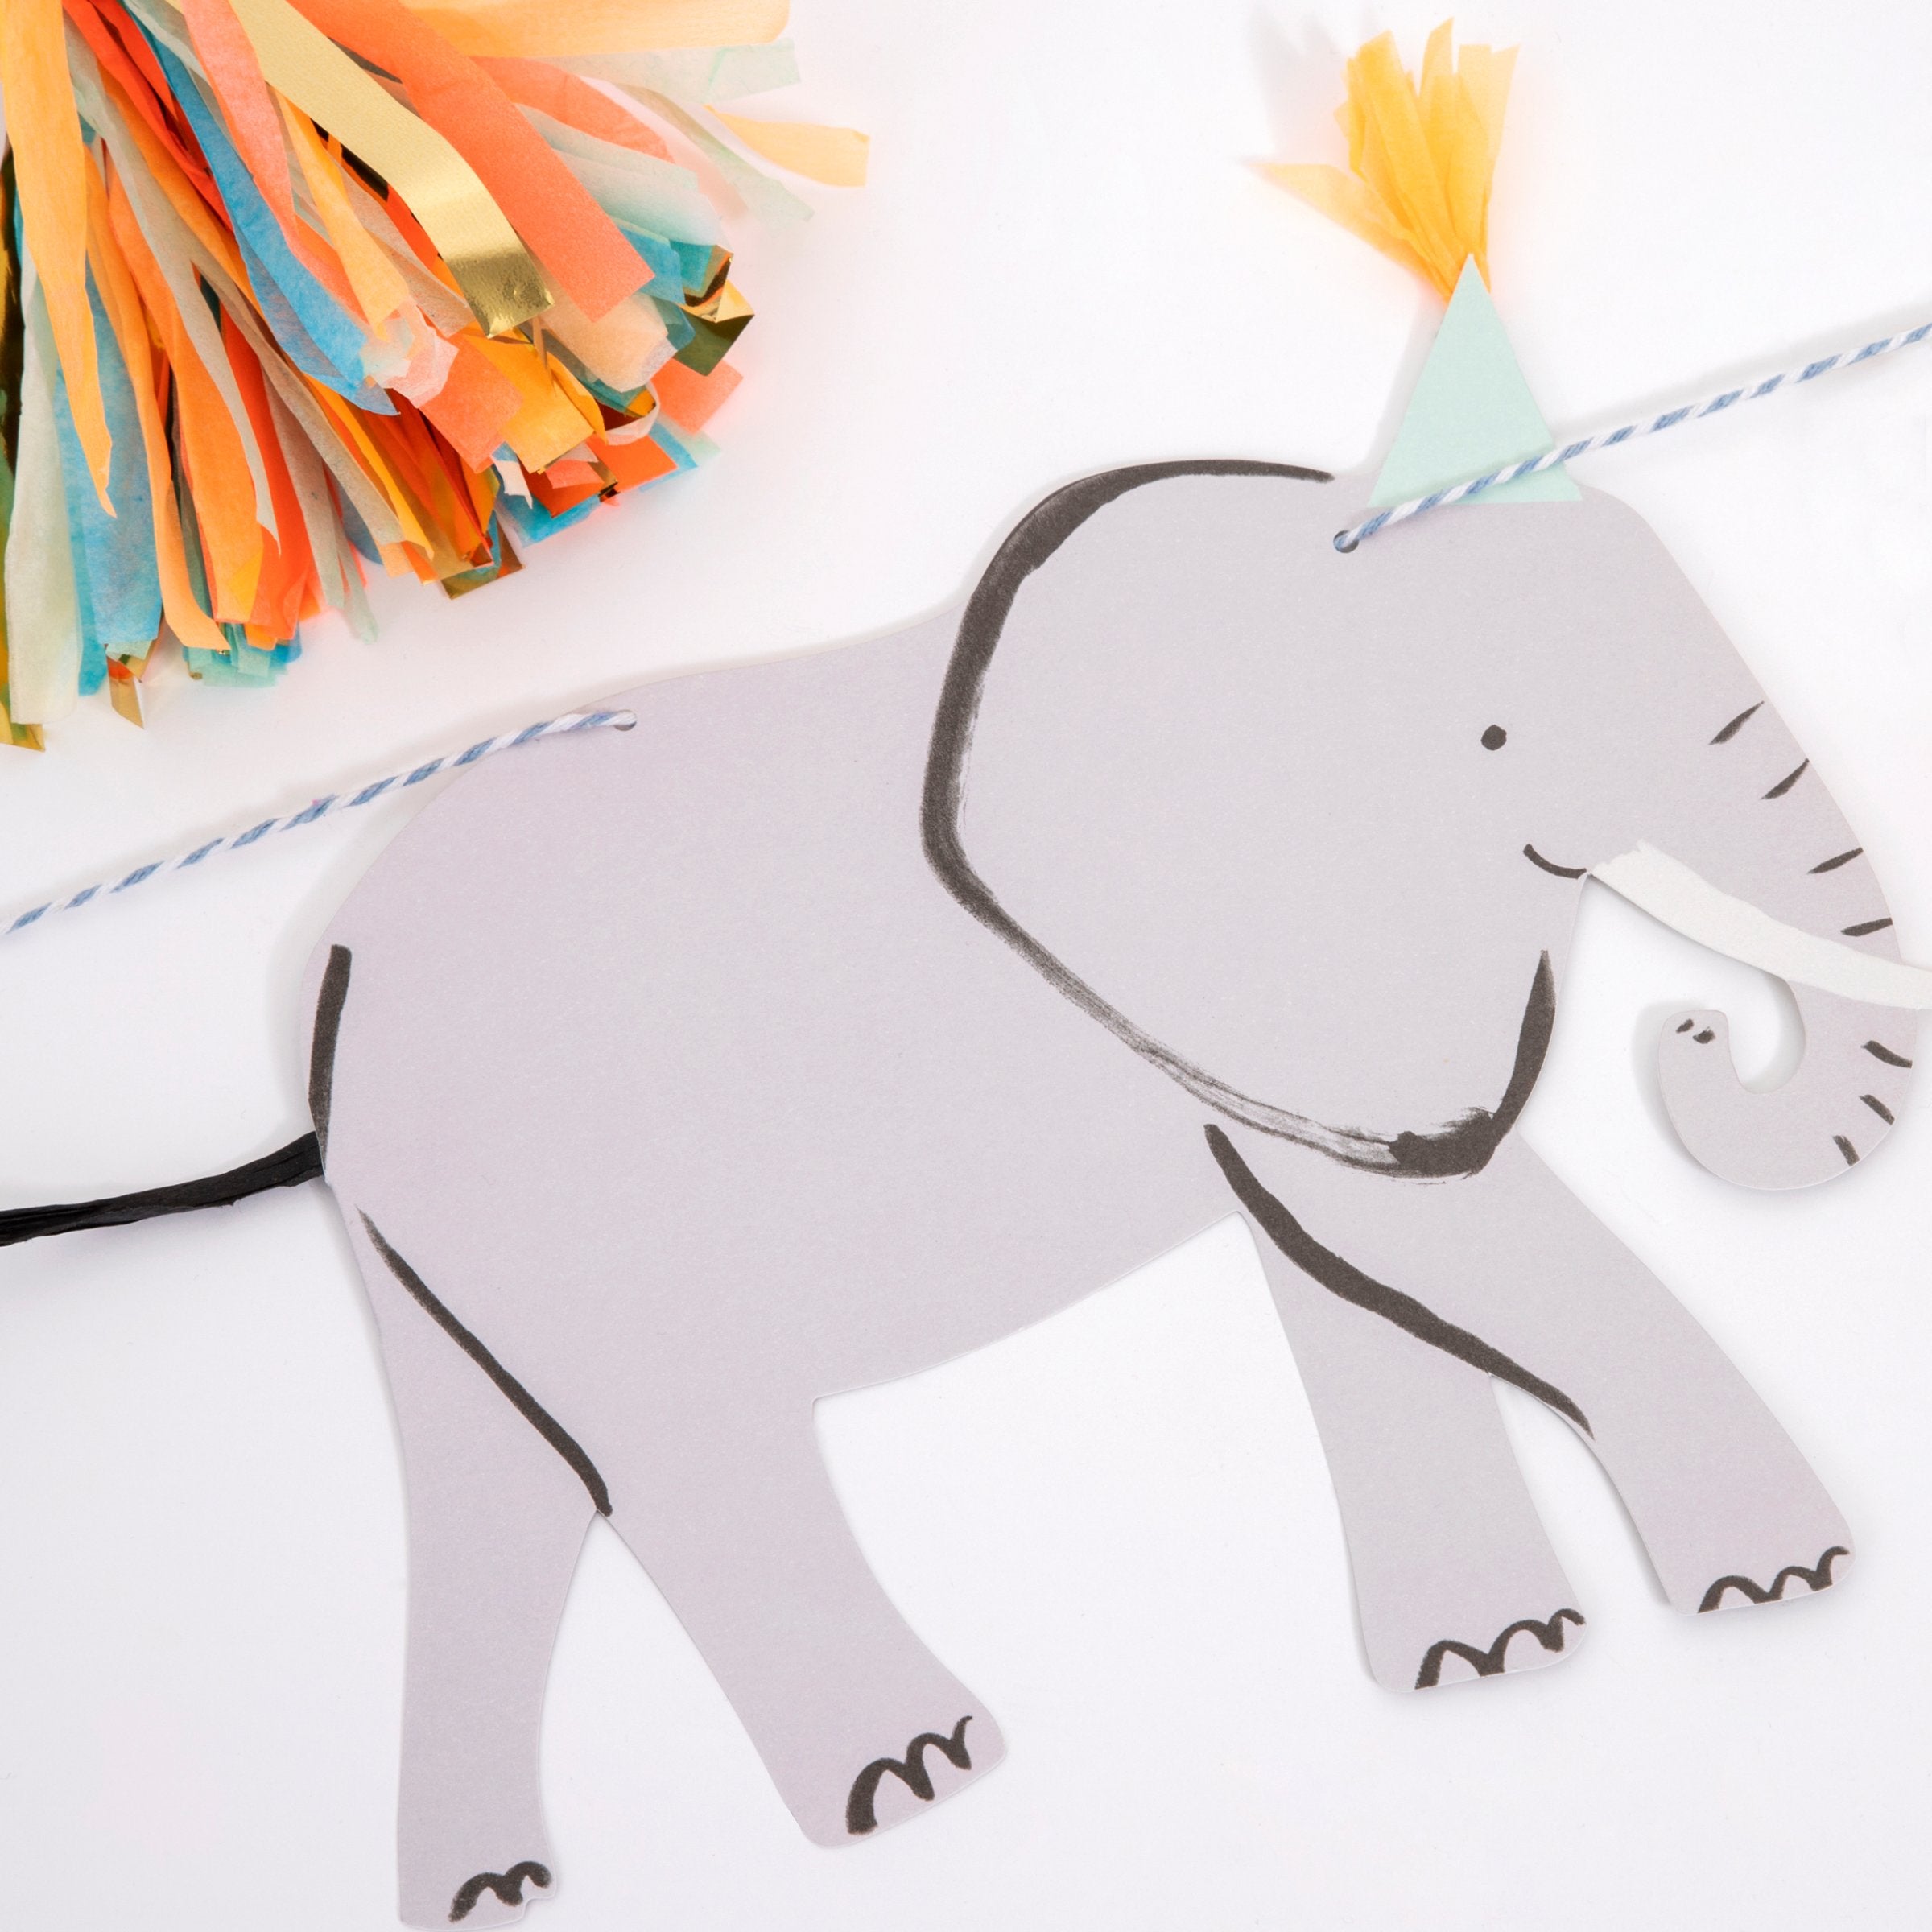 Our birthday garland with safari animals is perfect for a safari theme party.